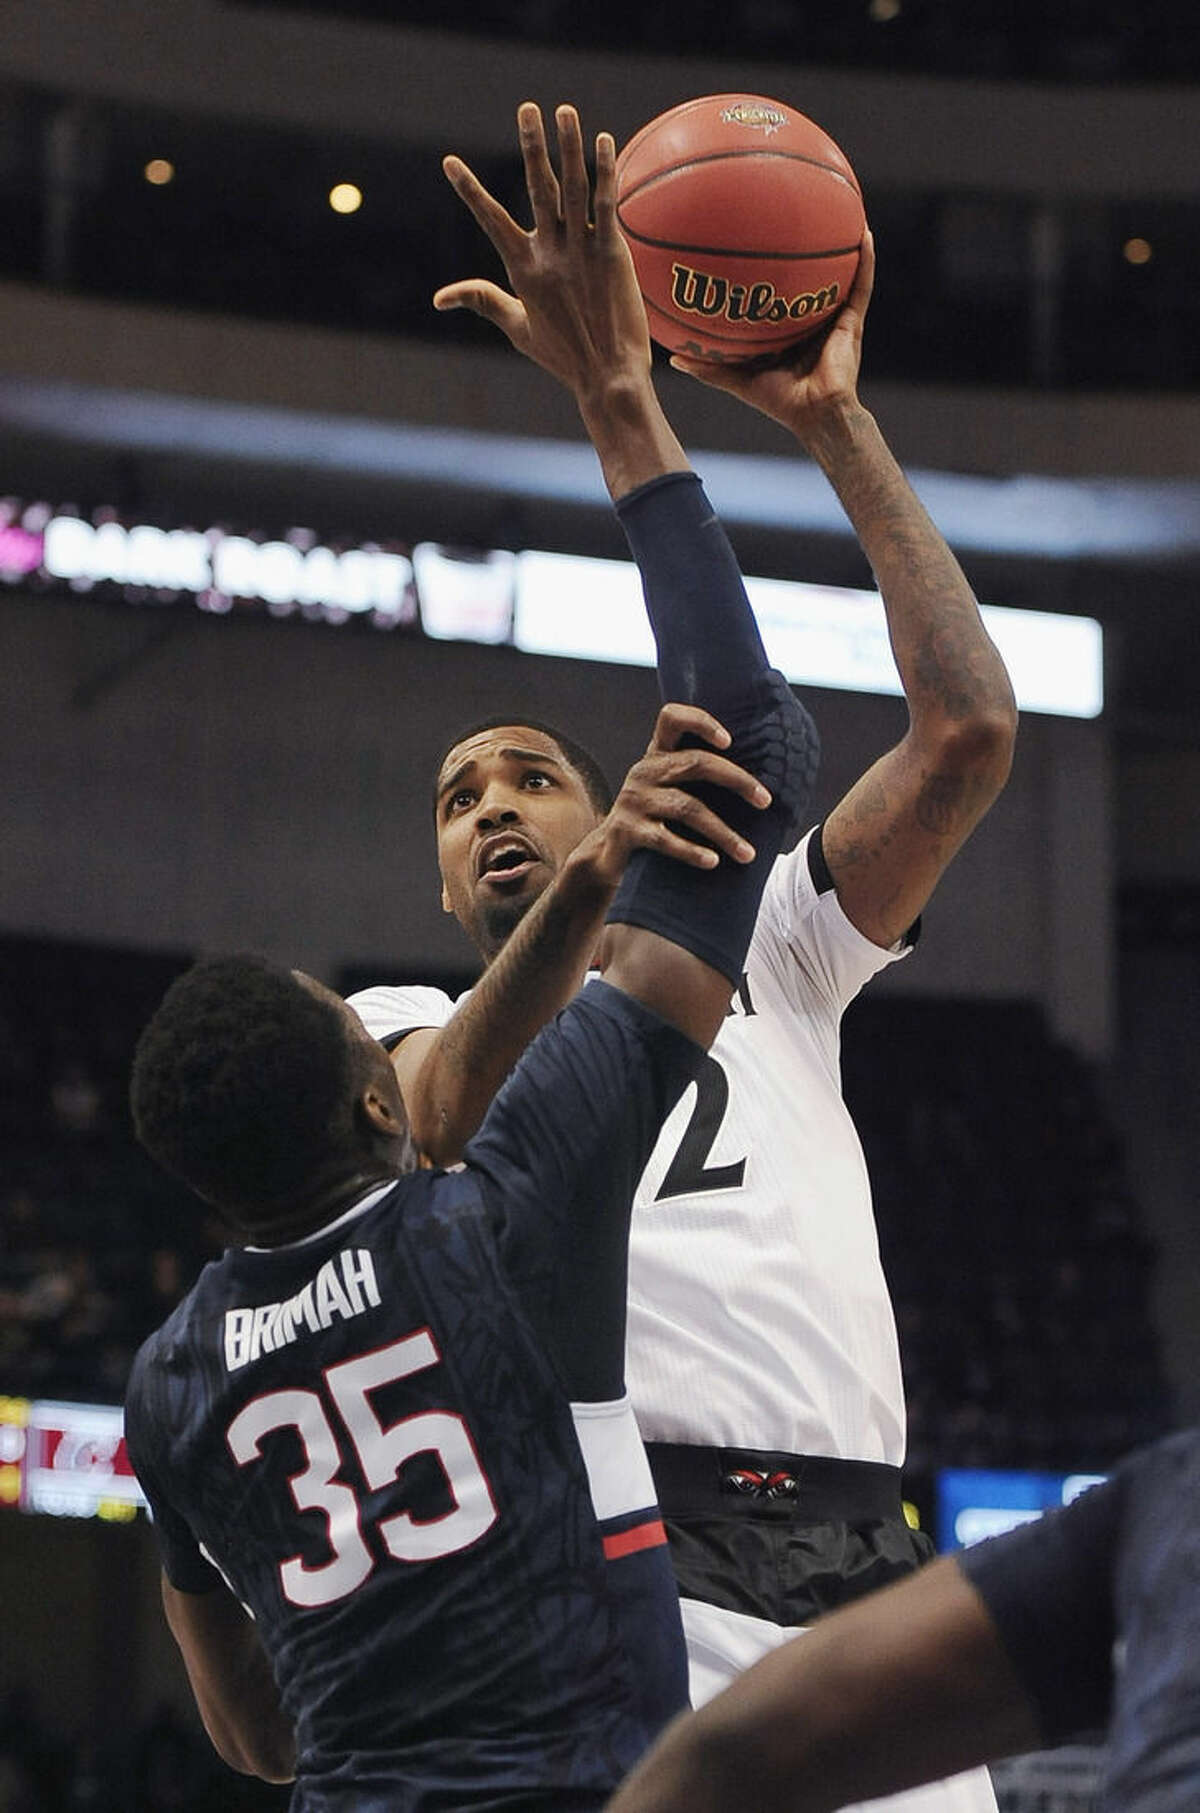 Cincinnati’s Octavius Ellis shoots as Connecticut’s Amida Brimah defends during the first half of an NCAA college basketball game in the quarterfinals of the American Athletic Conference tournament, Friday, March 13, 2015, in Hartford, Conn. (AP Photo/Jessica Hill)